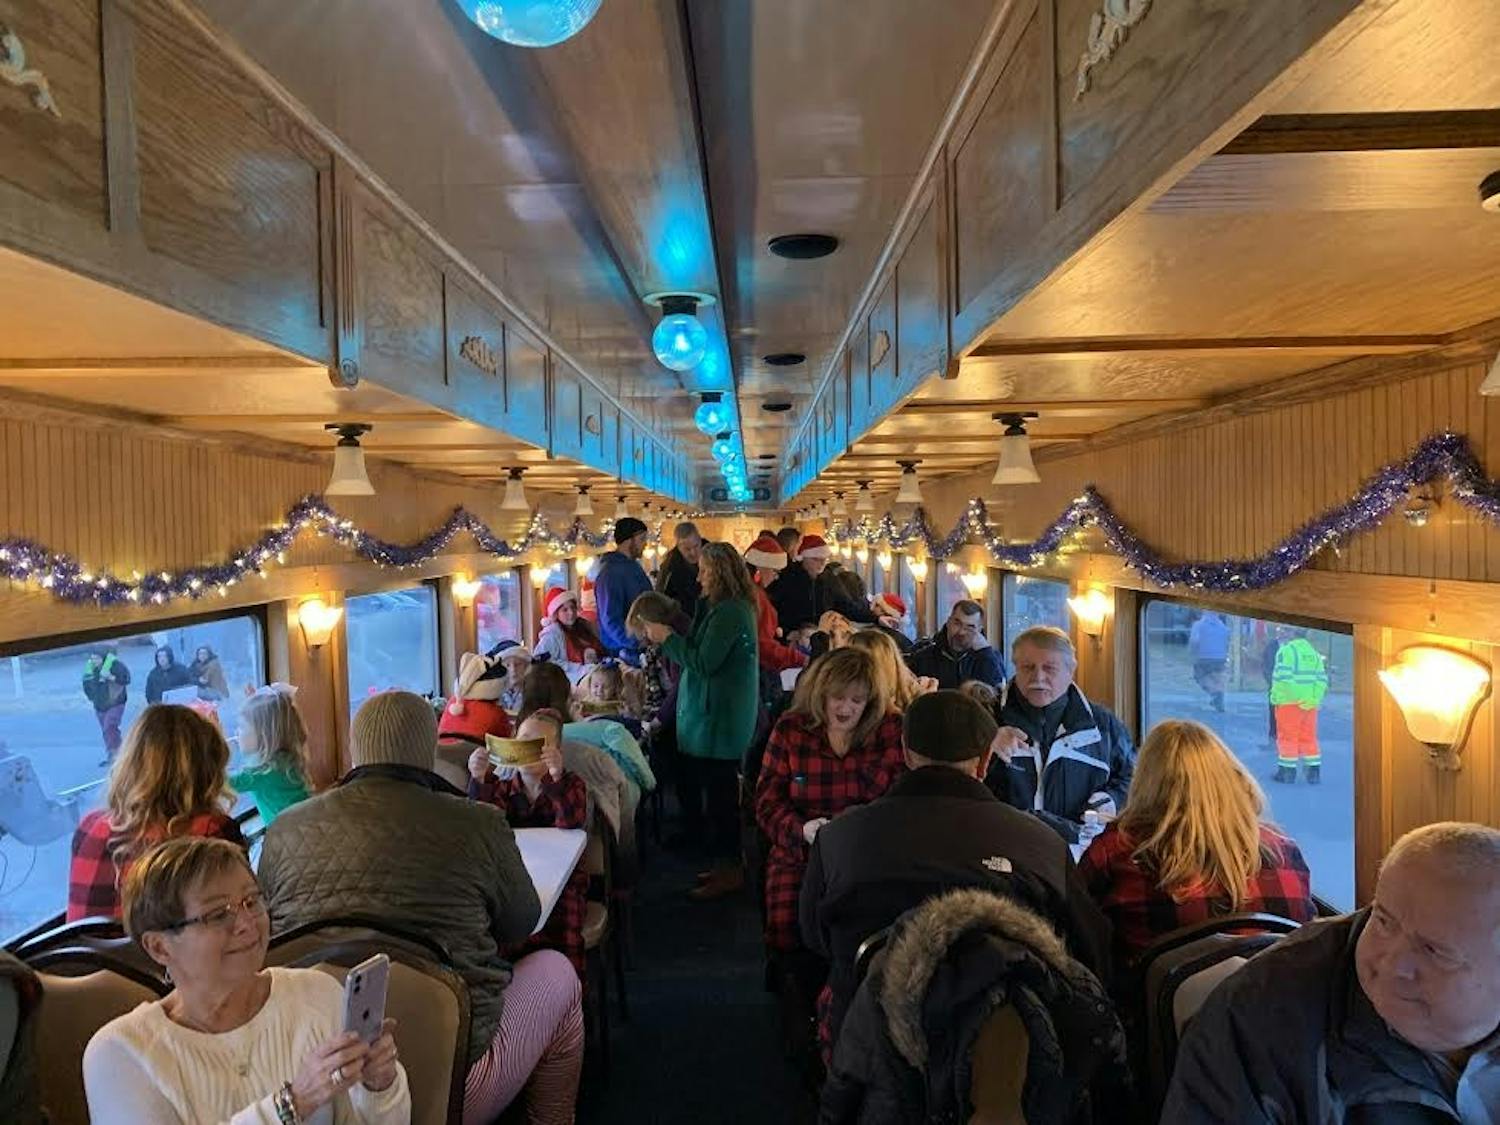 Passengers take their seats and eagerly await the train's departure to the North Pole.